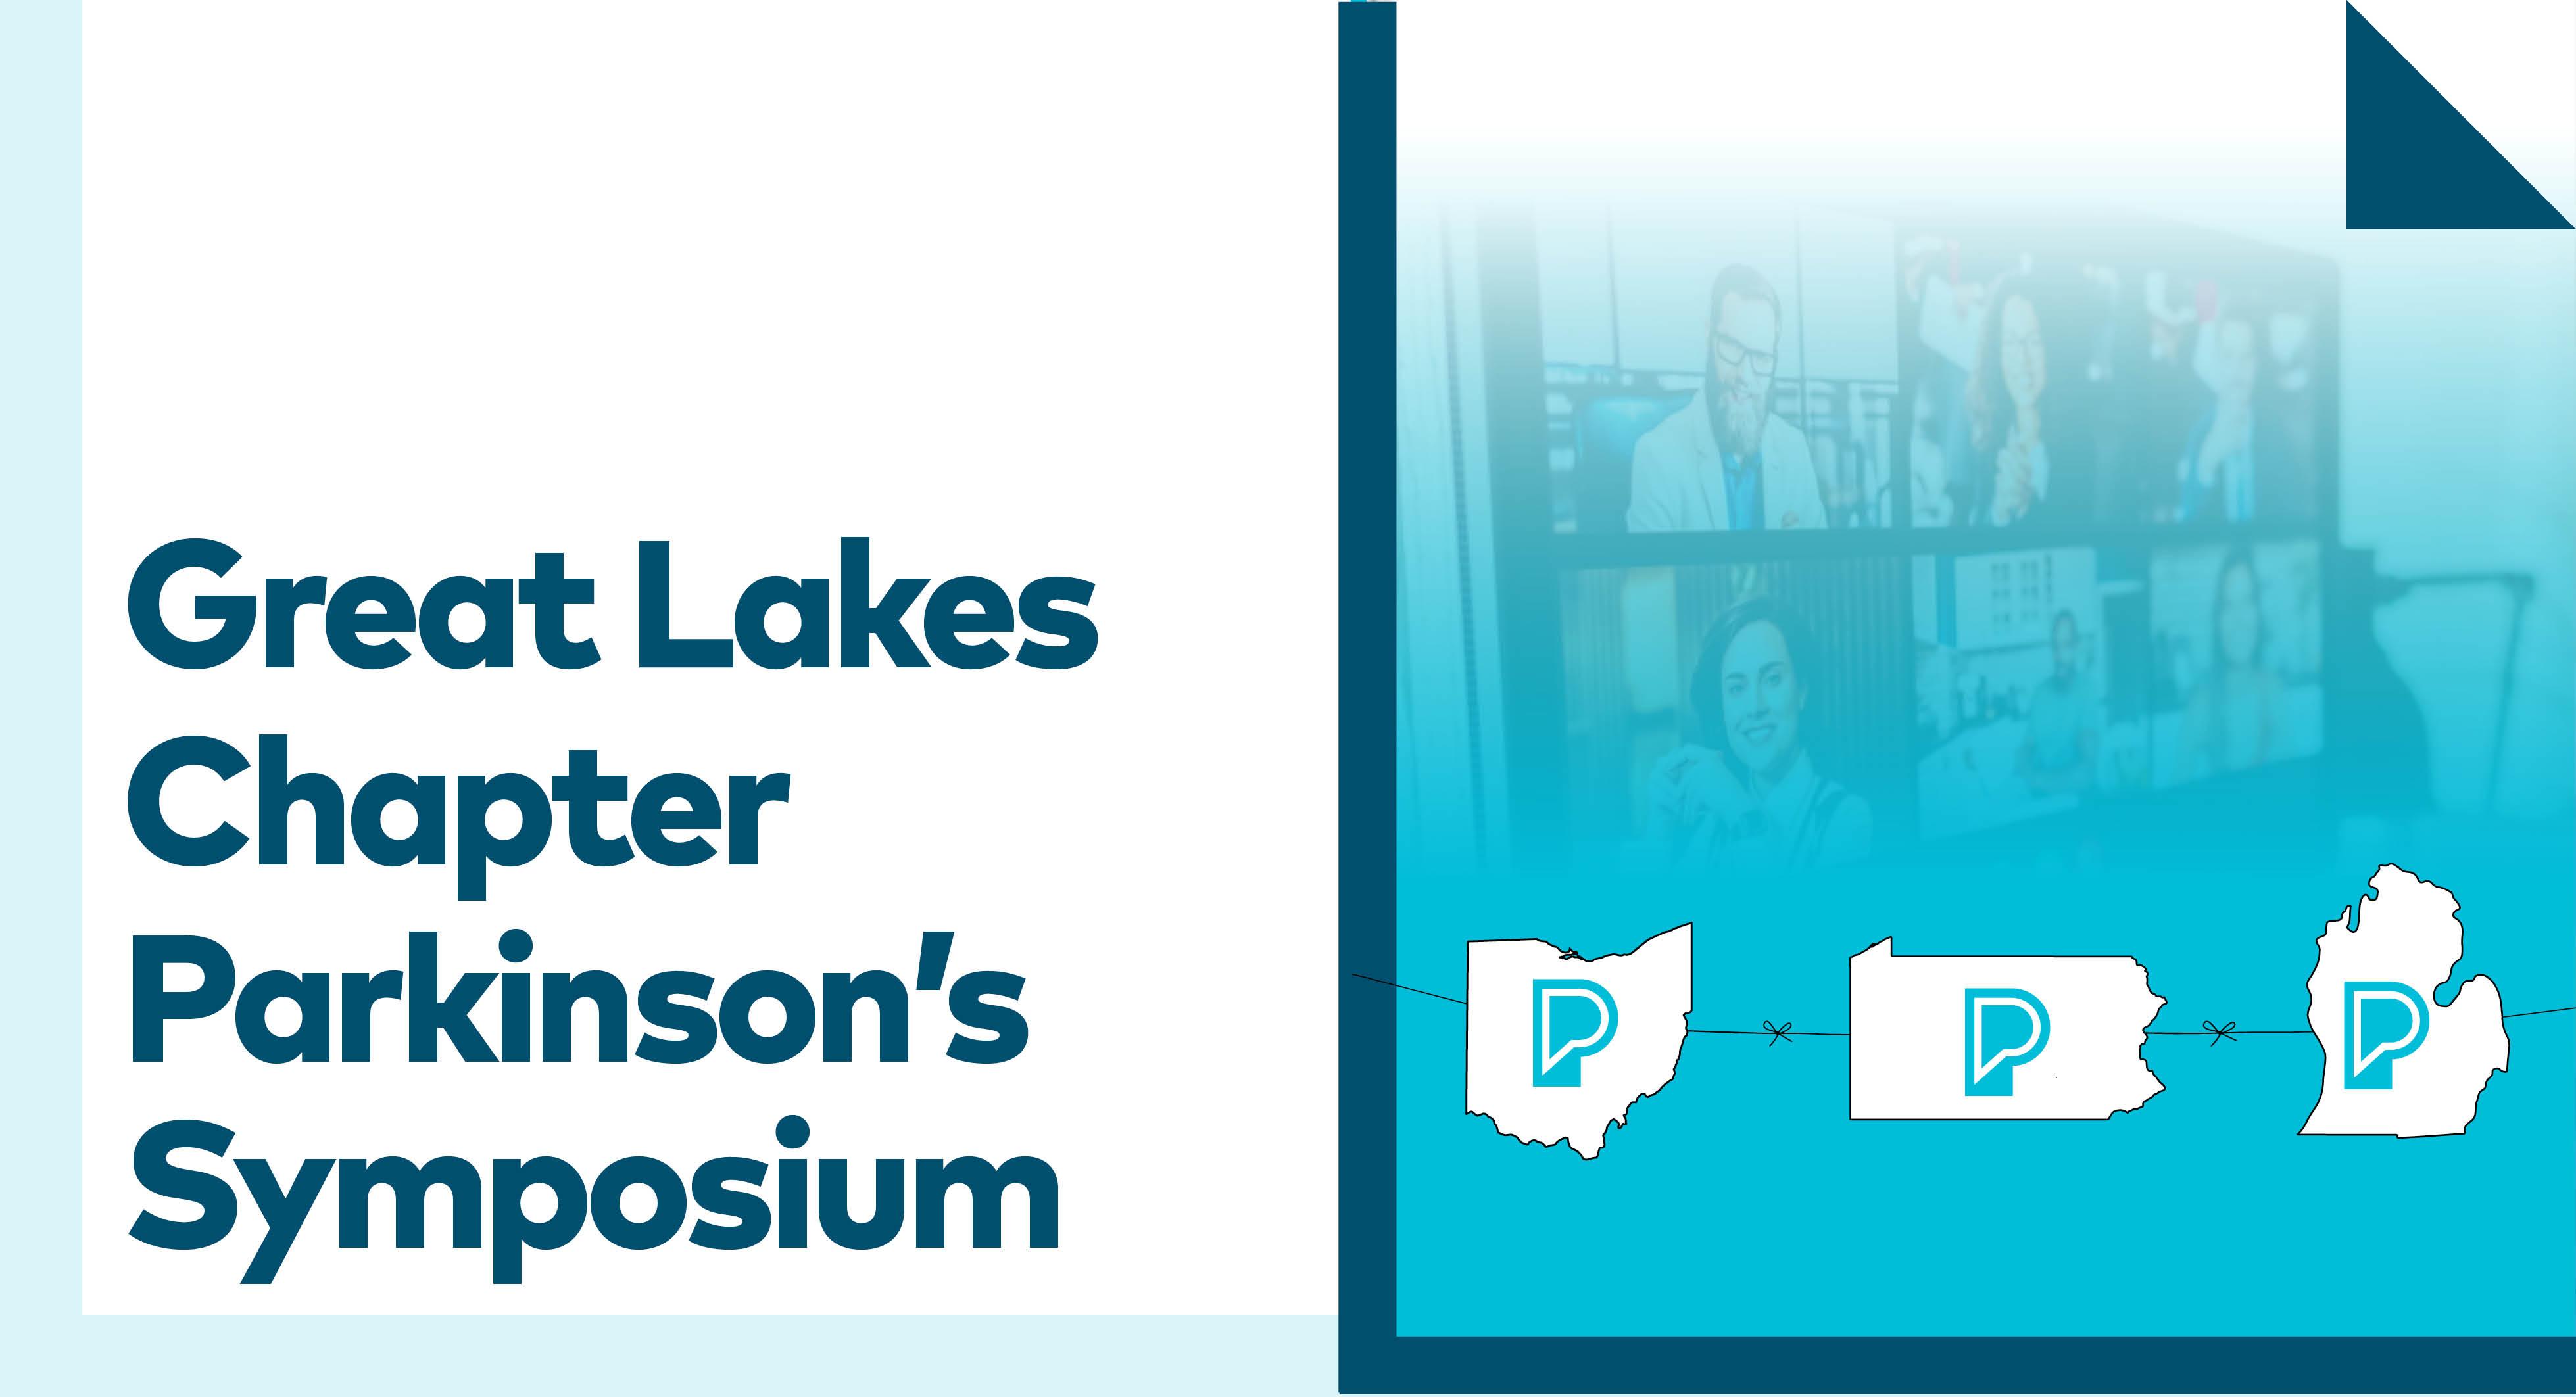 Great Lakes Chapter Symposium